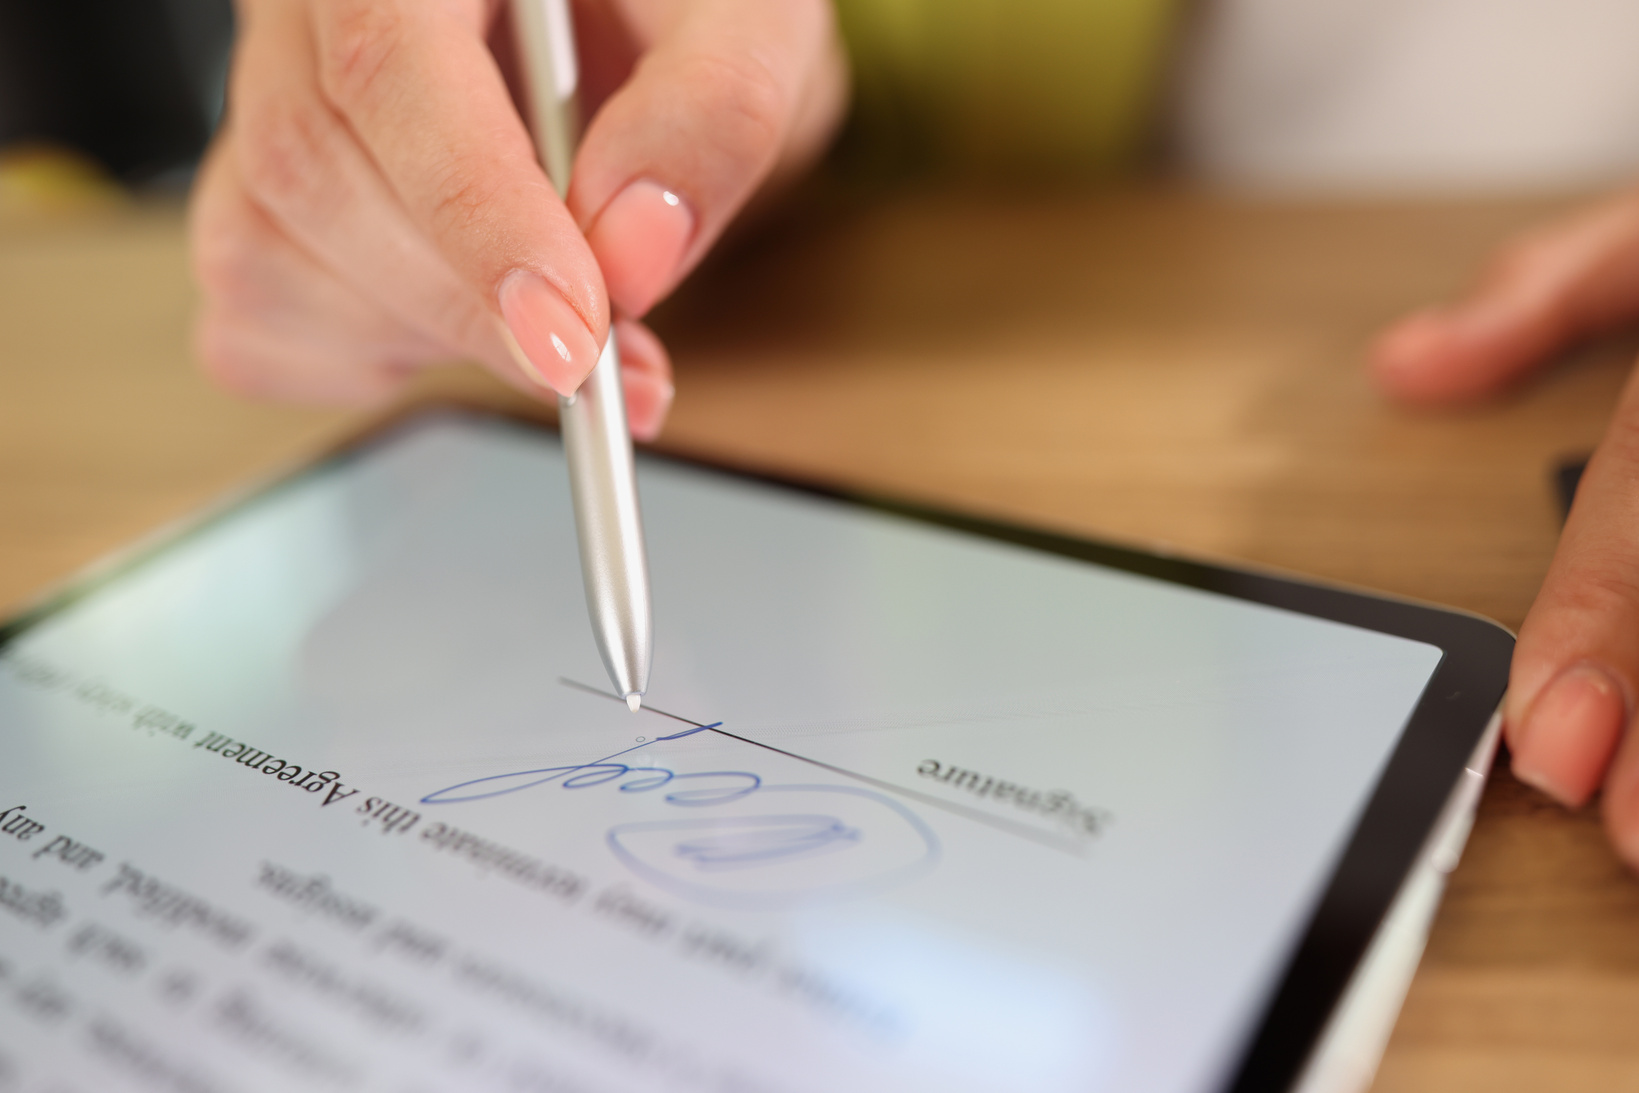 Female Hand Signing E-Document on Tablet with Stylus